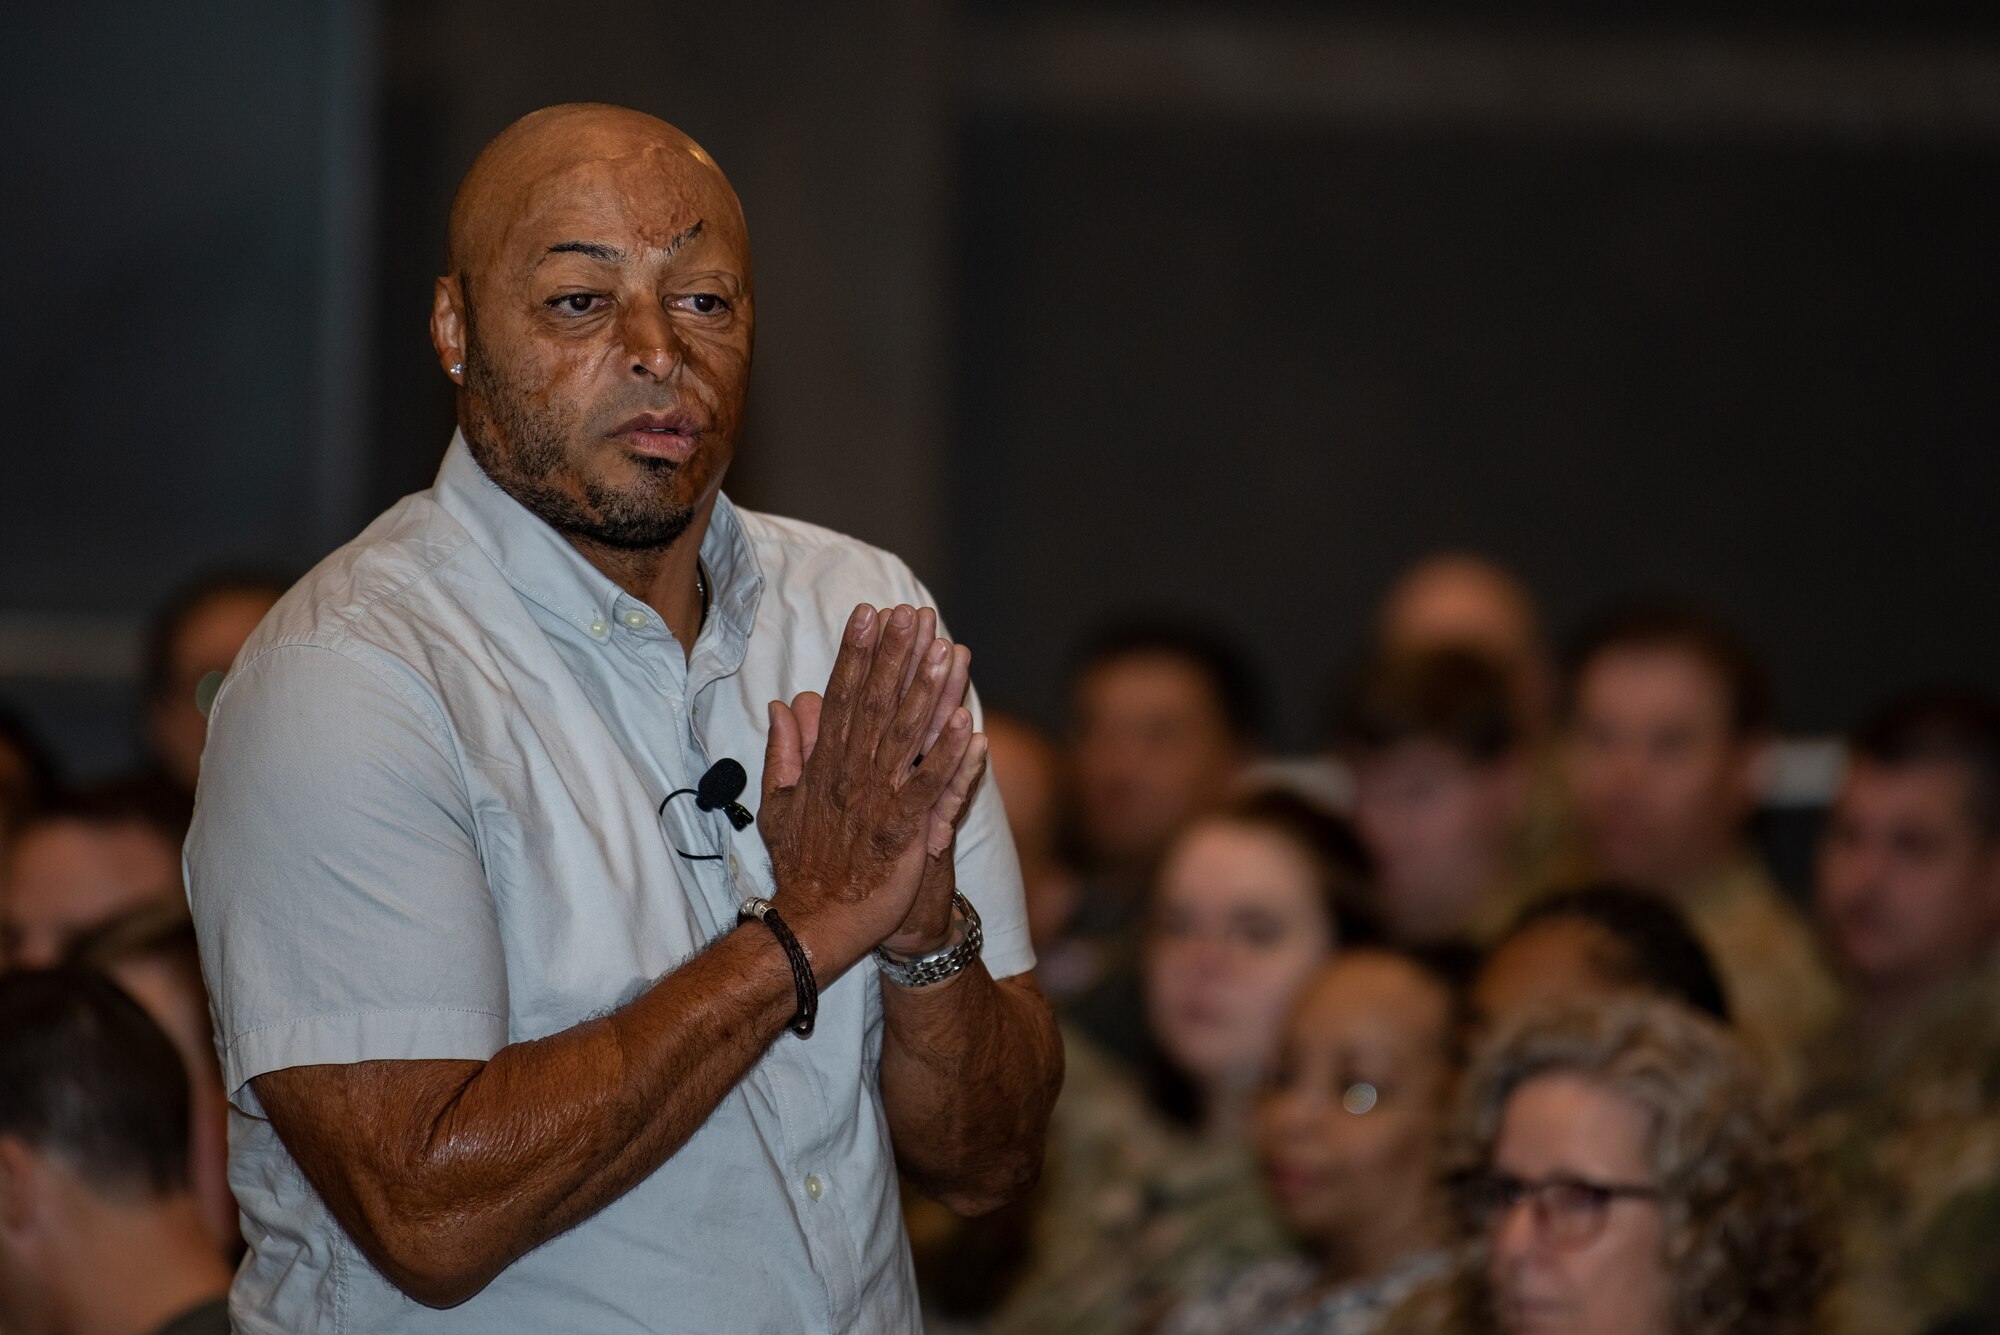 J.R. Martinez, a combat veteran and motivational speaker, speaks to the 317th Airlift Wing during a resiliency training day at Dyess Air Force Base, Texas, Sept. 23, 2022. Martinez spoke about his journey of recovery after a landmine explosion left him injured during his deployment in Iraq, 2003. (U.S. Air Force photo by Airman 1st Class Ryan Hayman)